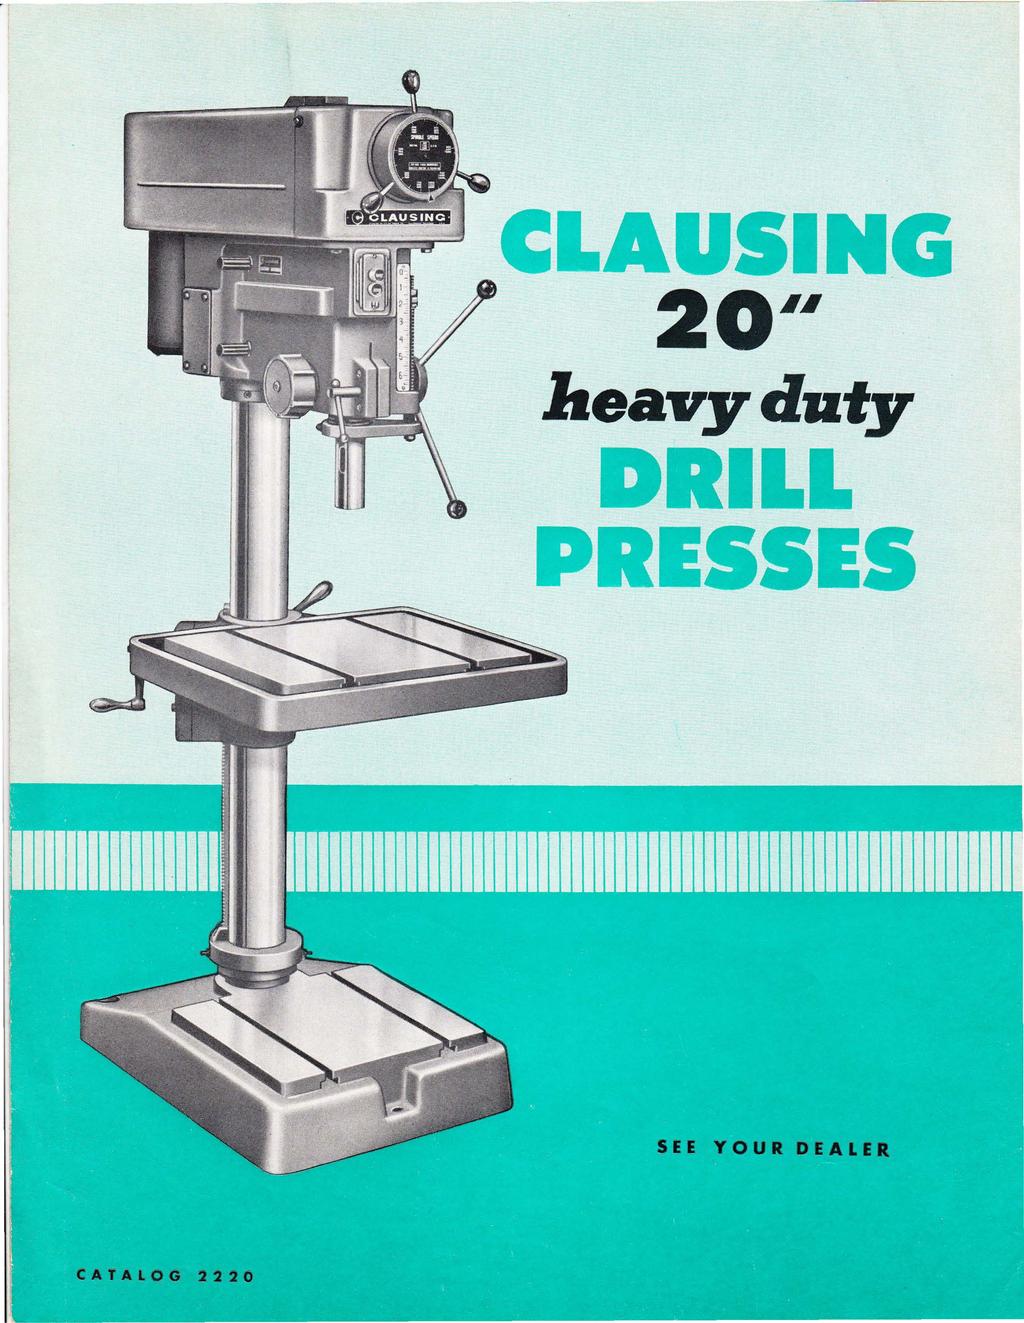 ~ CLAUSING 20 lteavy dafy DRILL